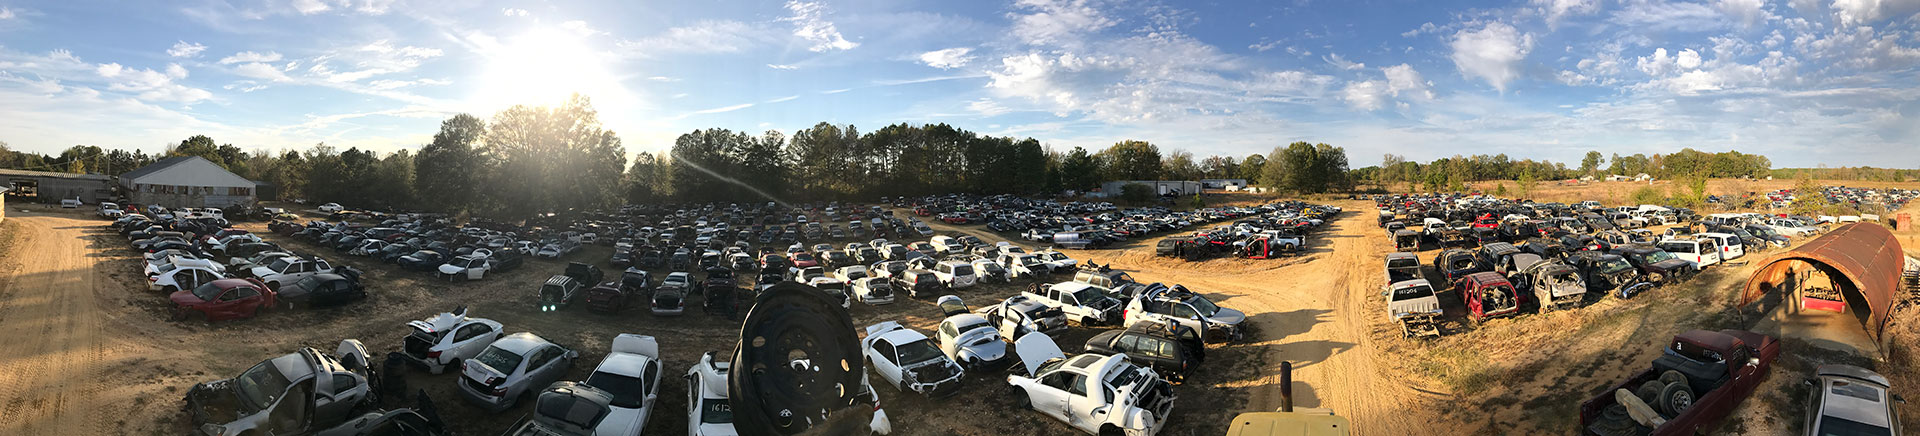 Wrecked cars in Keith Auto Recyclers salvage yard